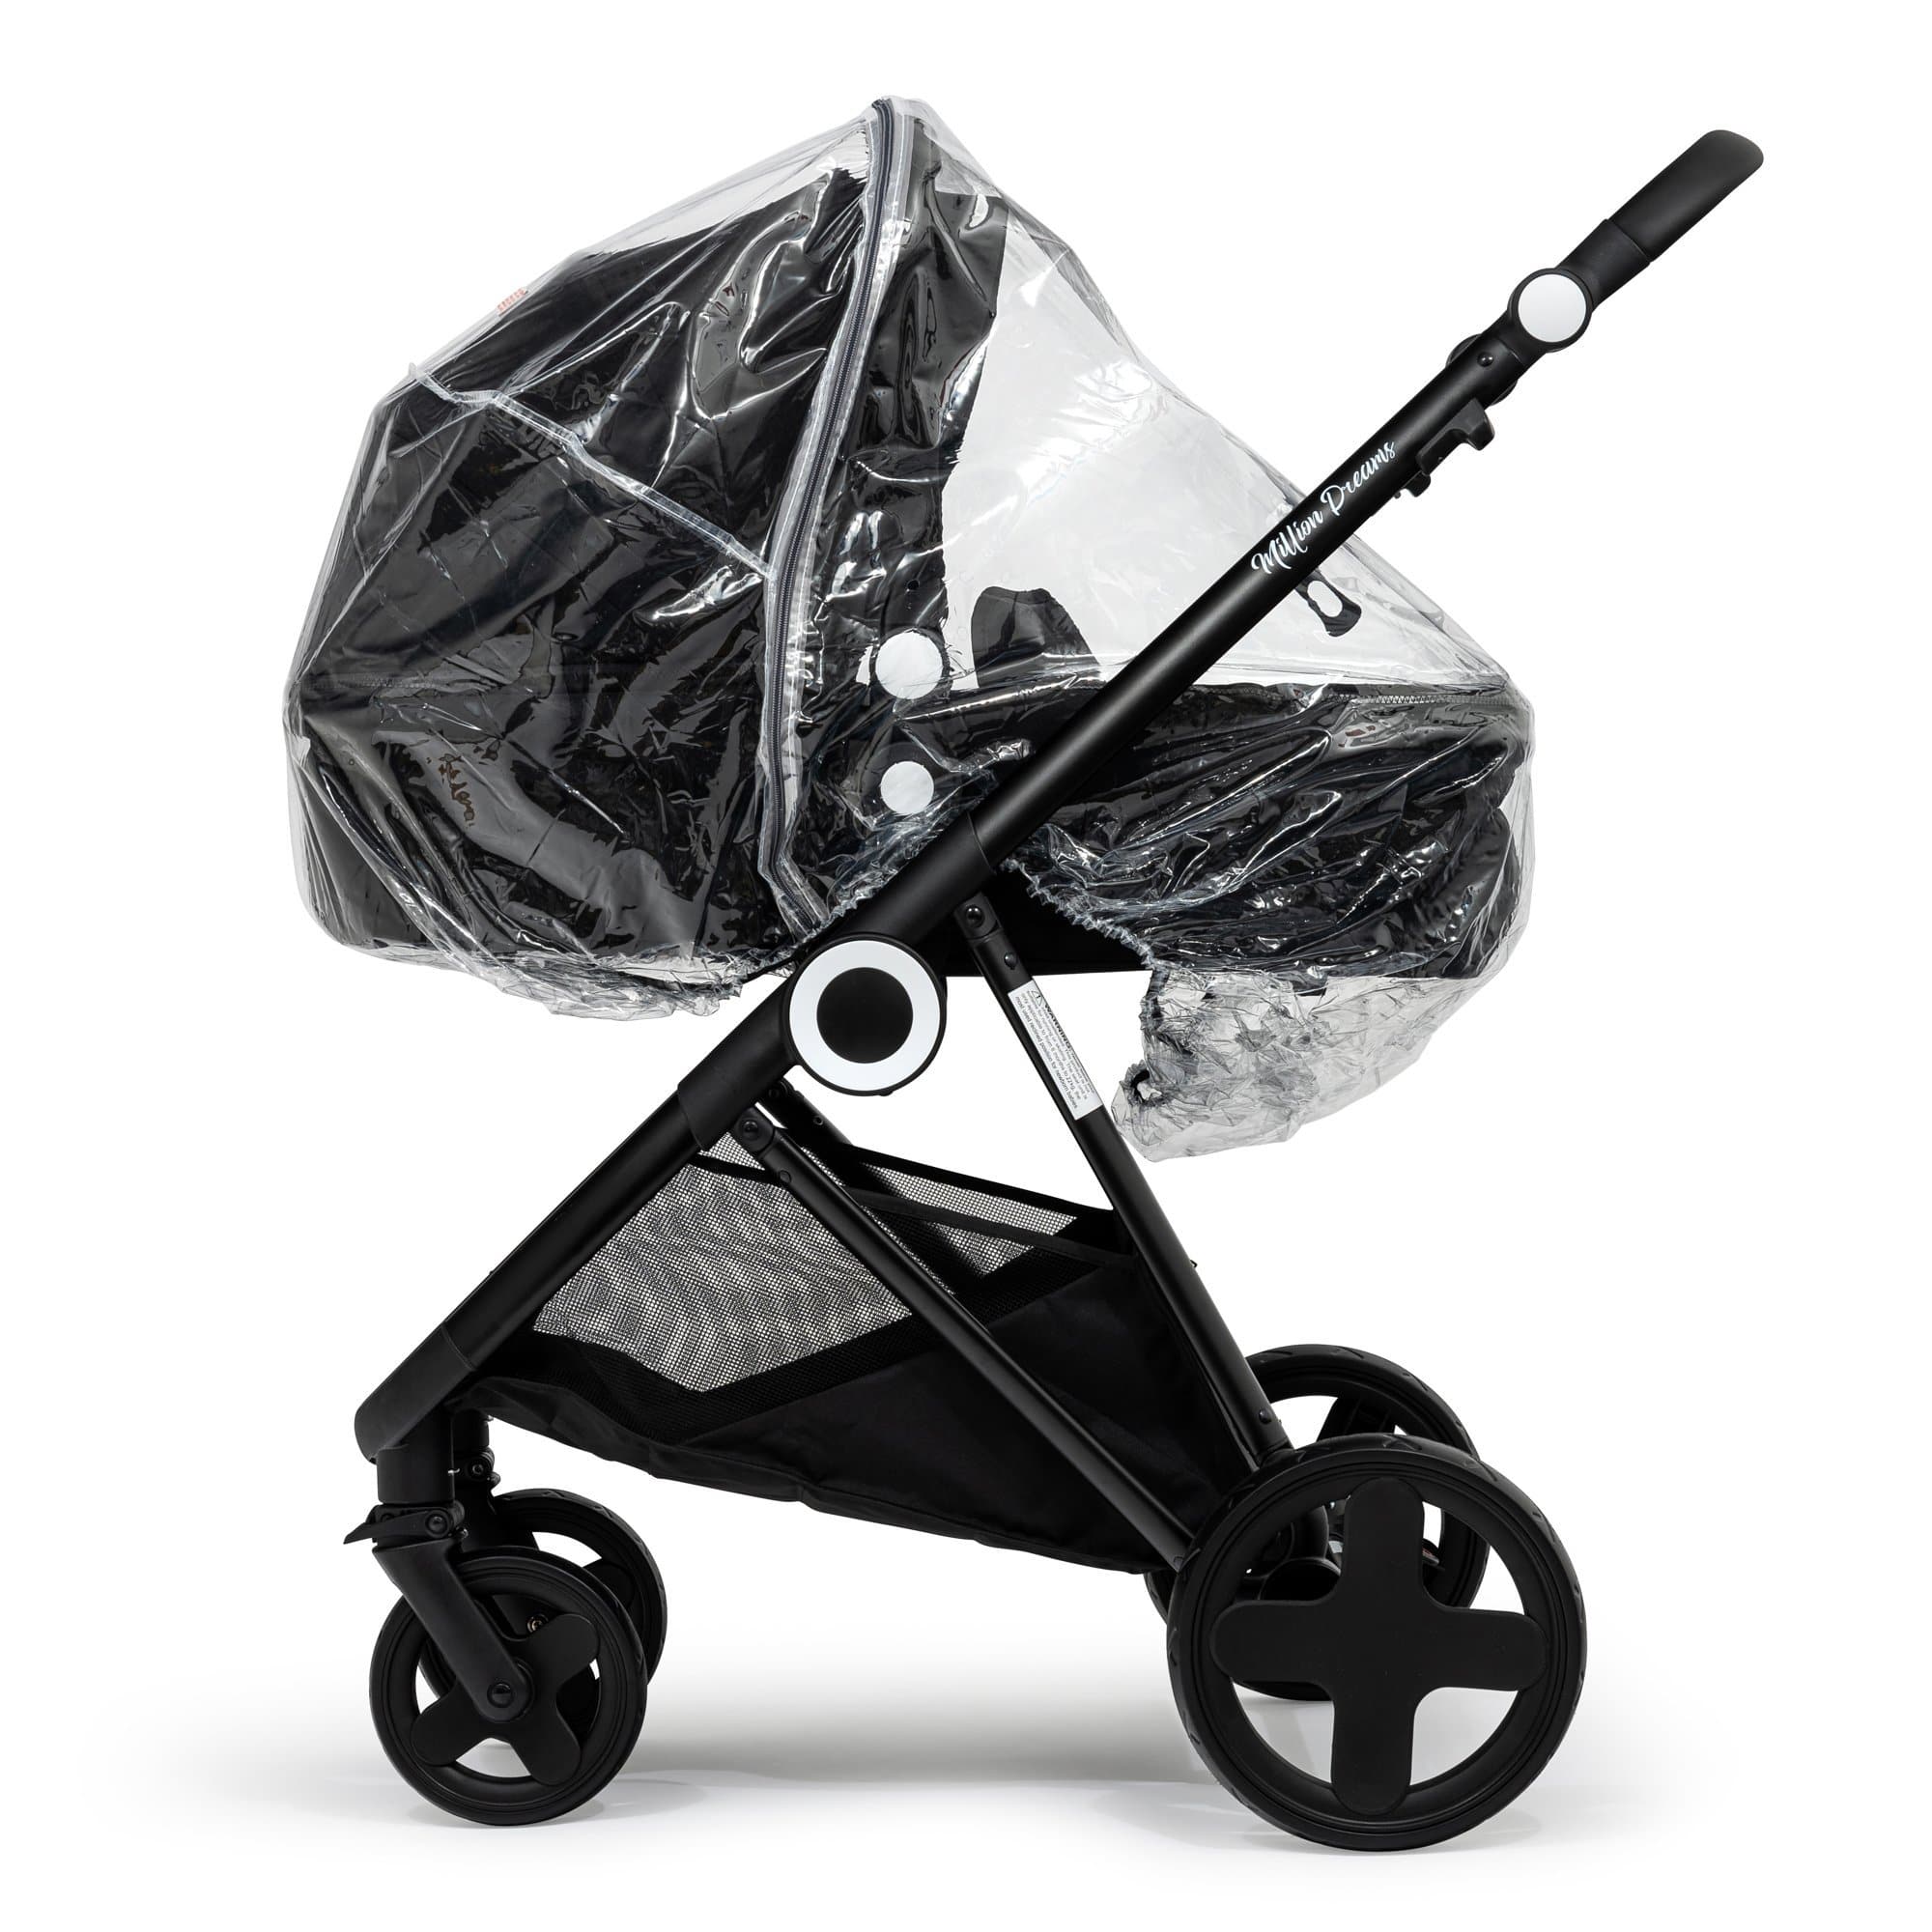 2 in 1 Rain Cover Compatible with TFK - Fits All Models - For Your Little One